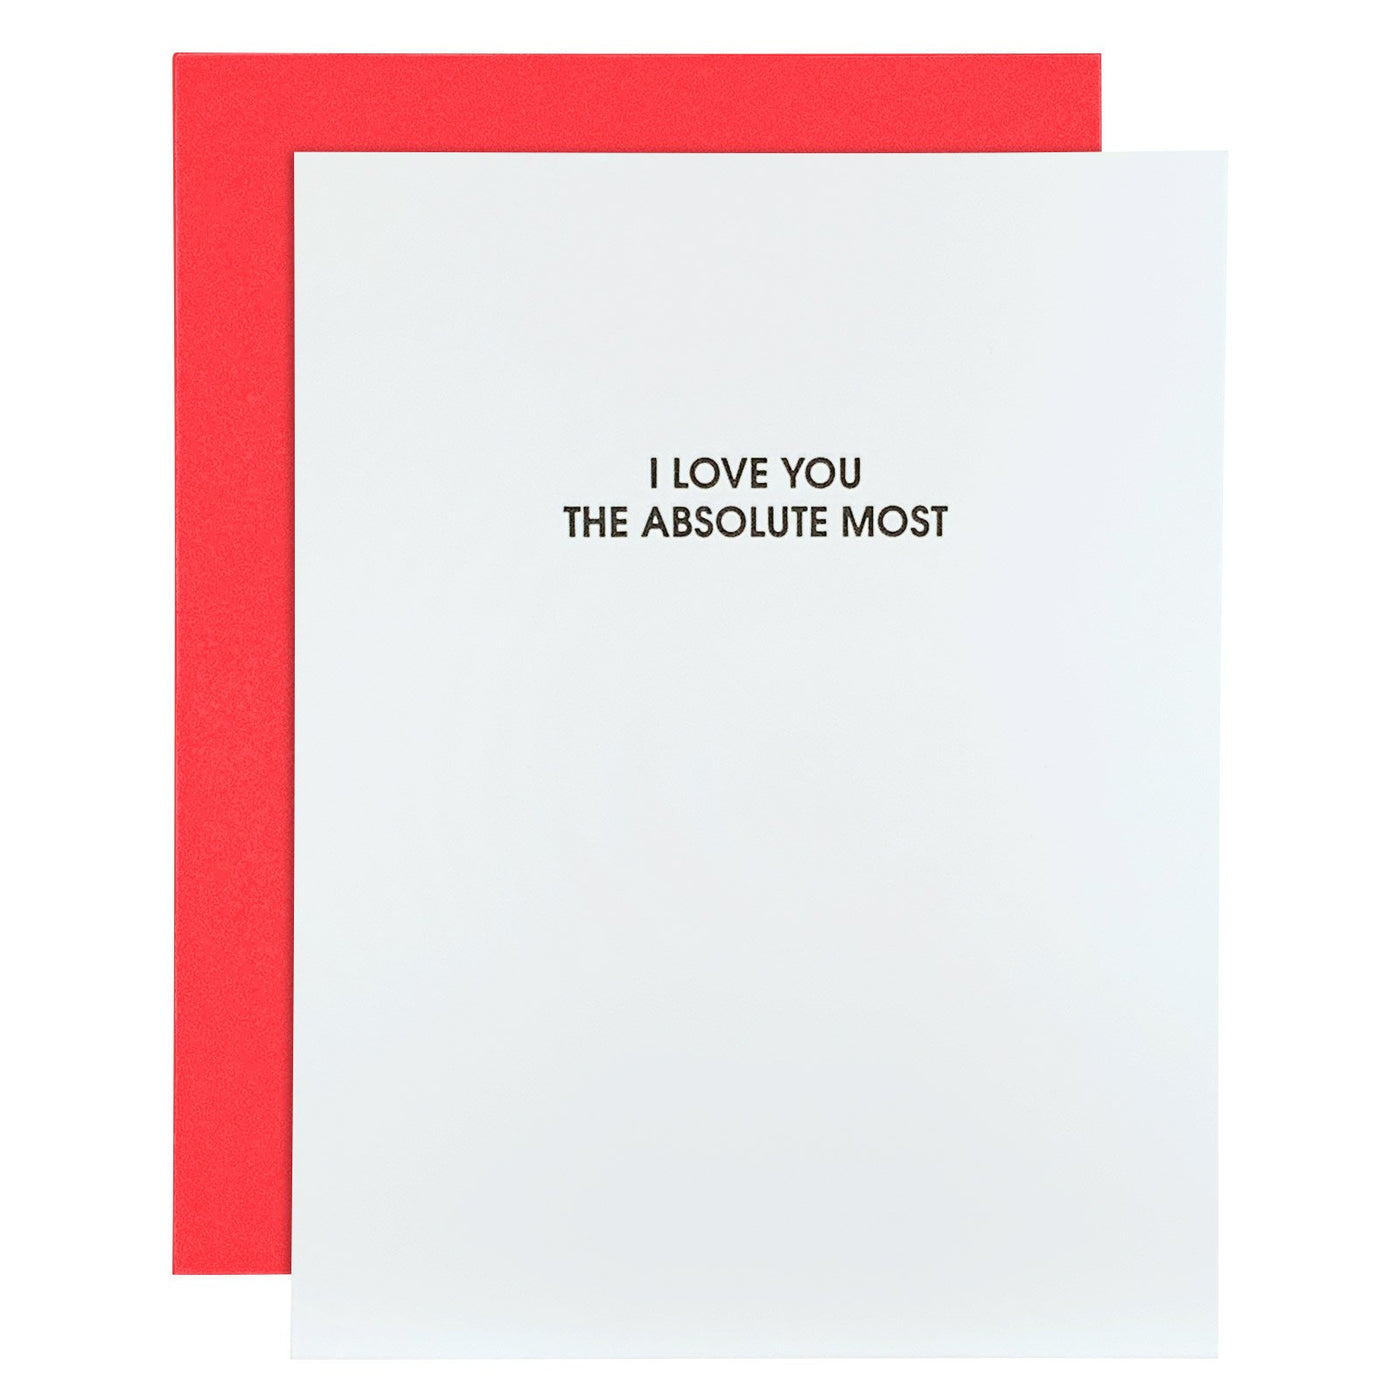 CARD LETTERPRESS "I LOVE YOU THE ABSOLUTE MOST"